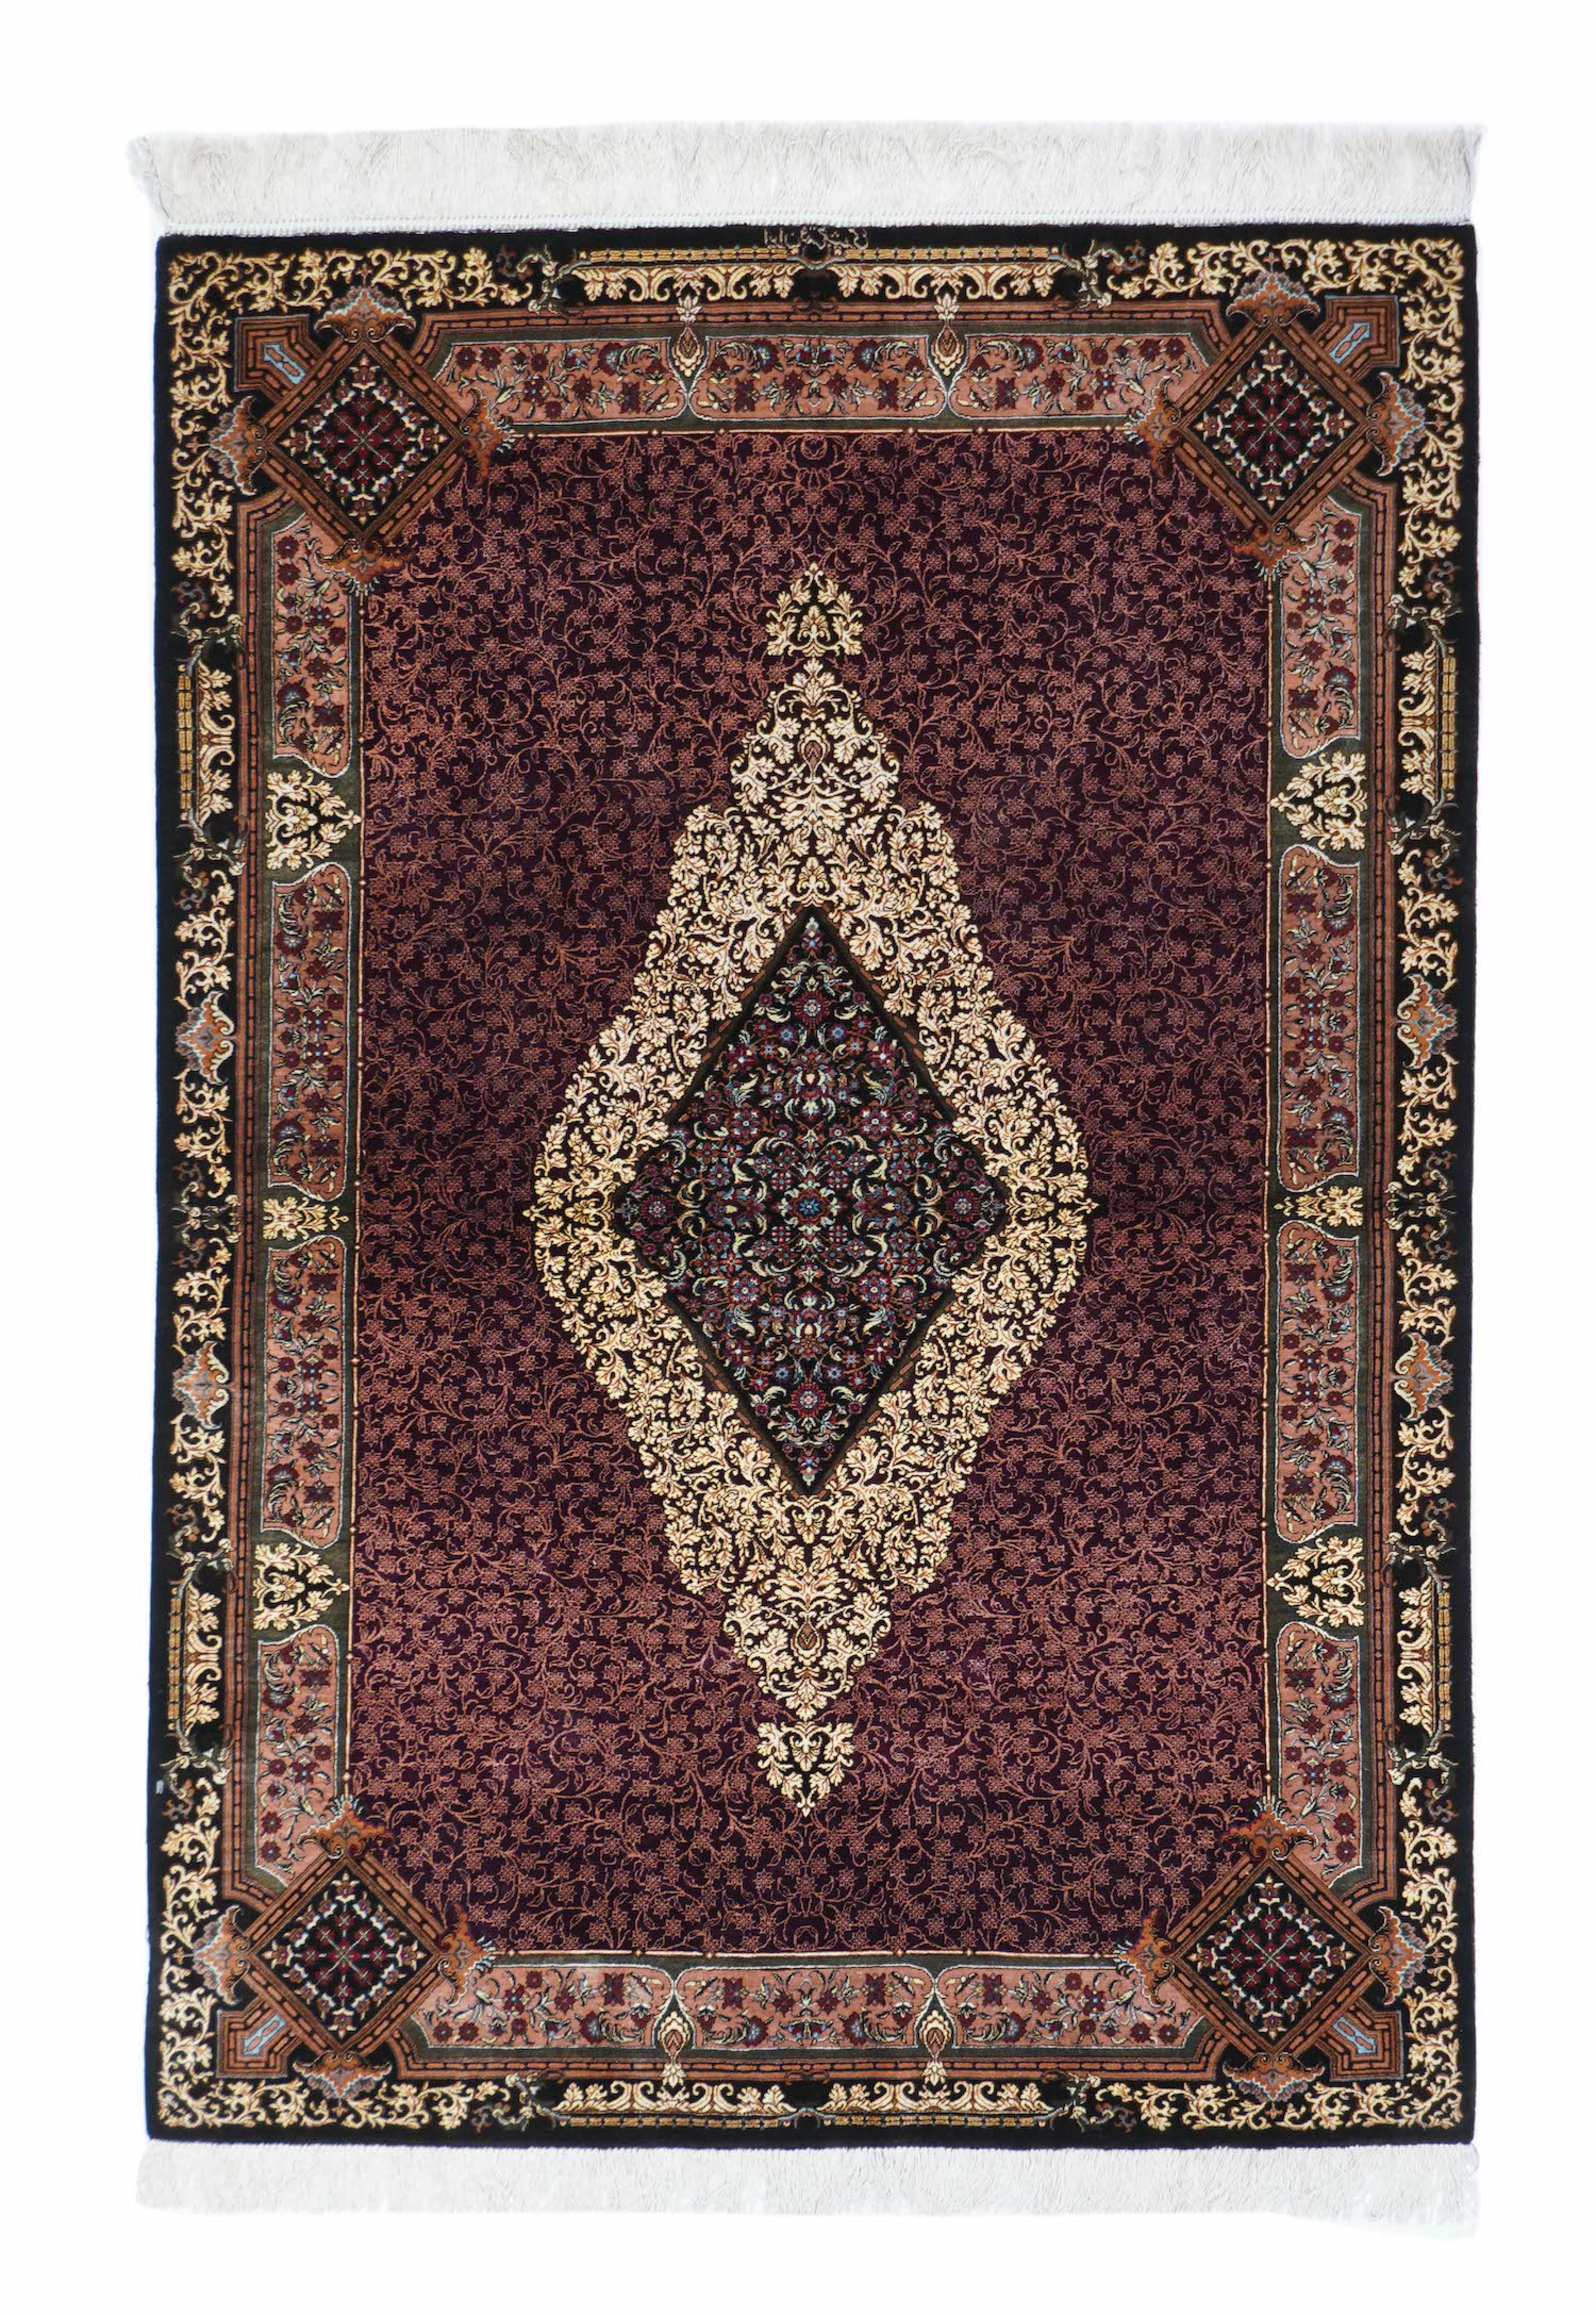 This extremely finely woven, densely detailed modern central Persian silk pile scatter shows a particularly dense design of leaves, blossoms and stems on a midnight ground with a central off white tall narrow medallion and a Navy conforming